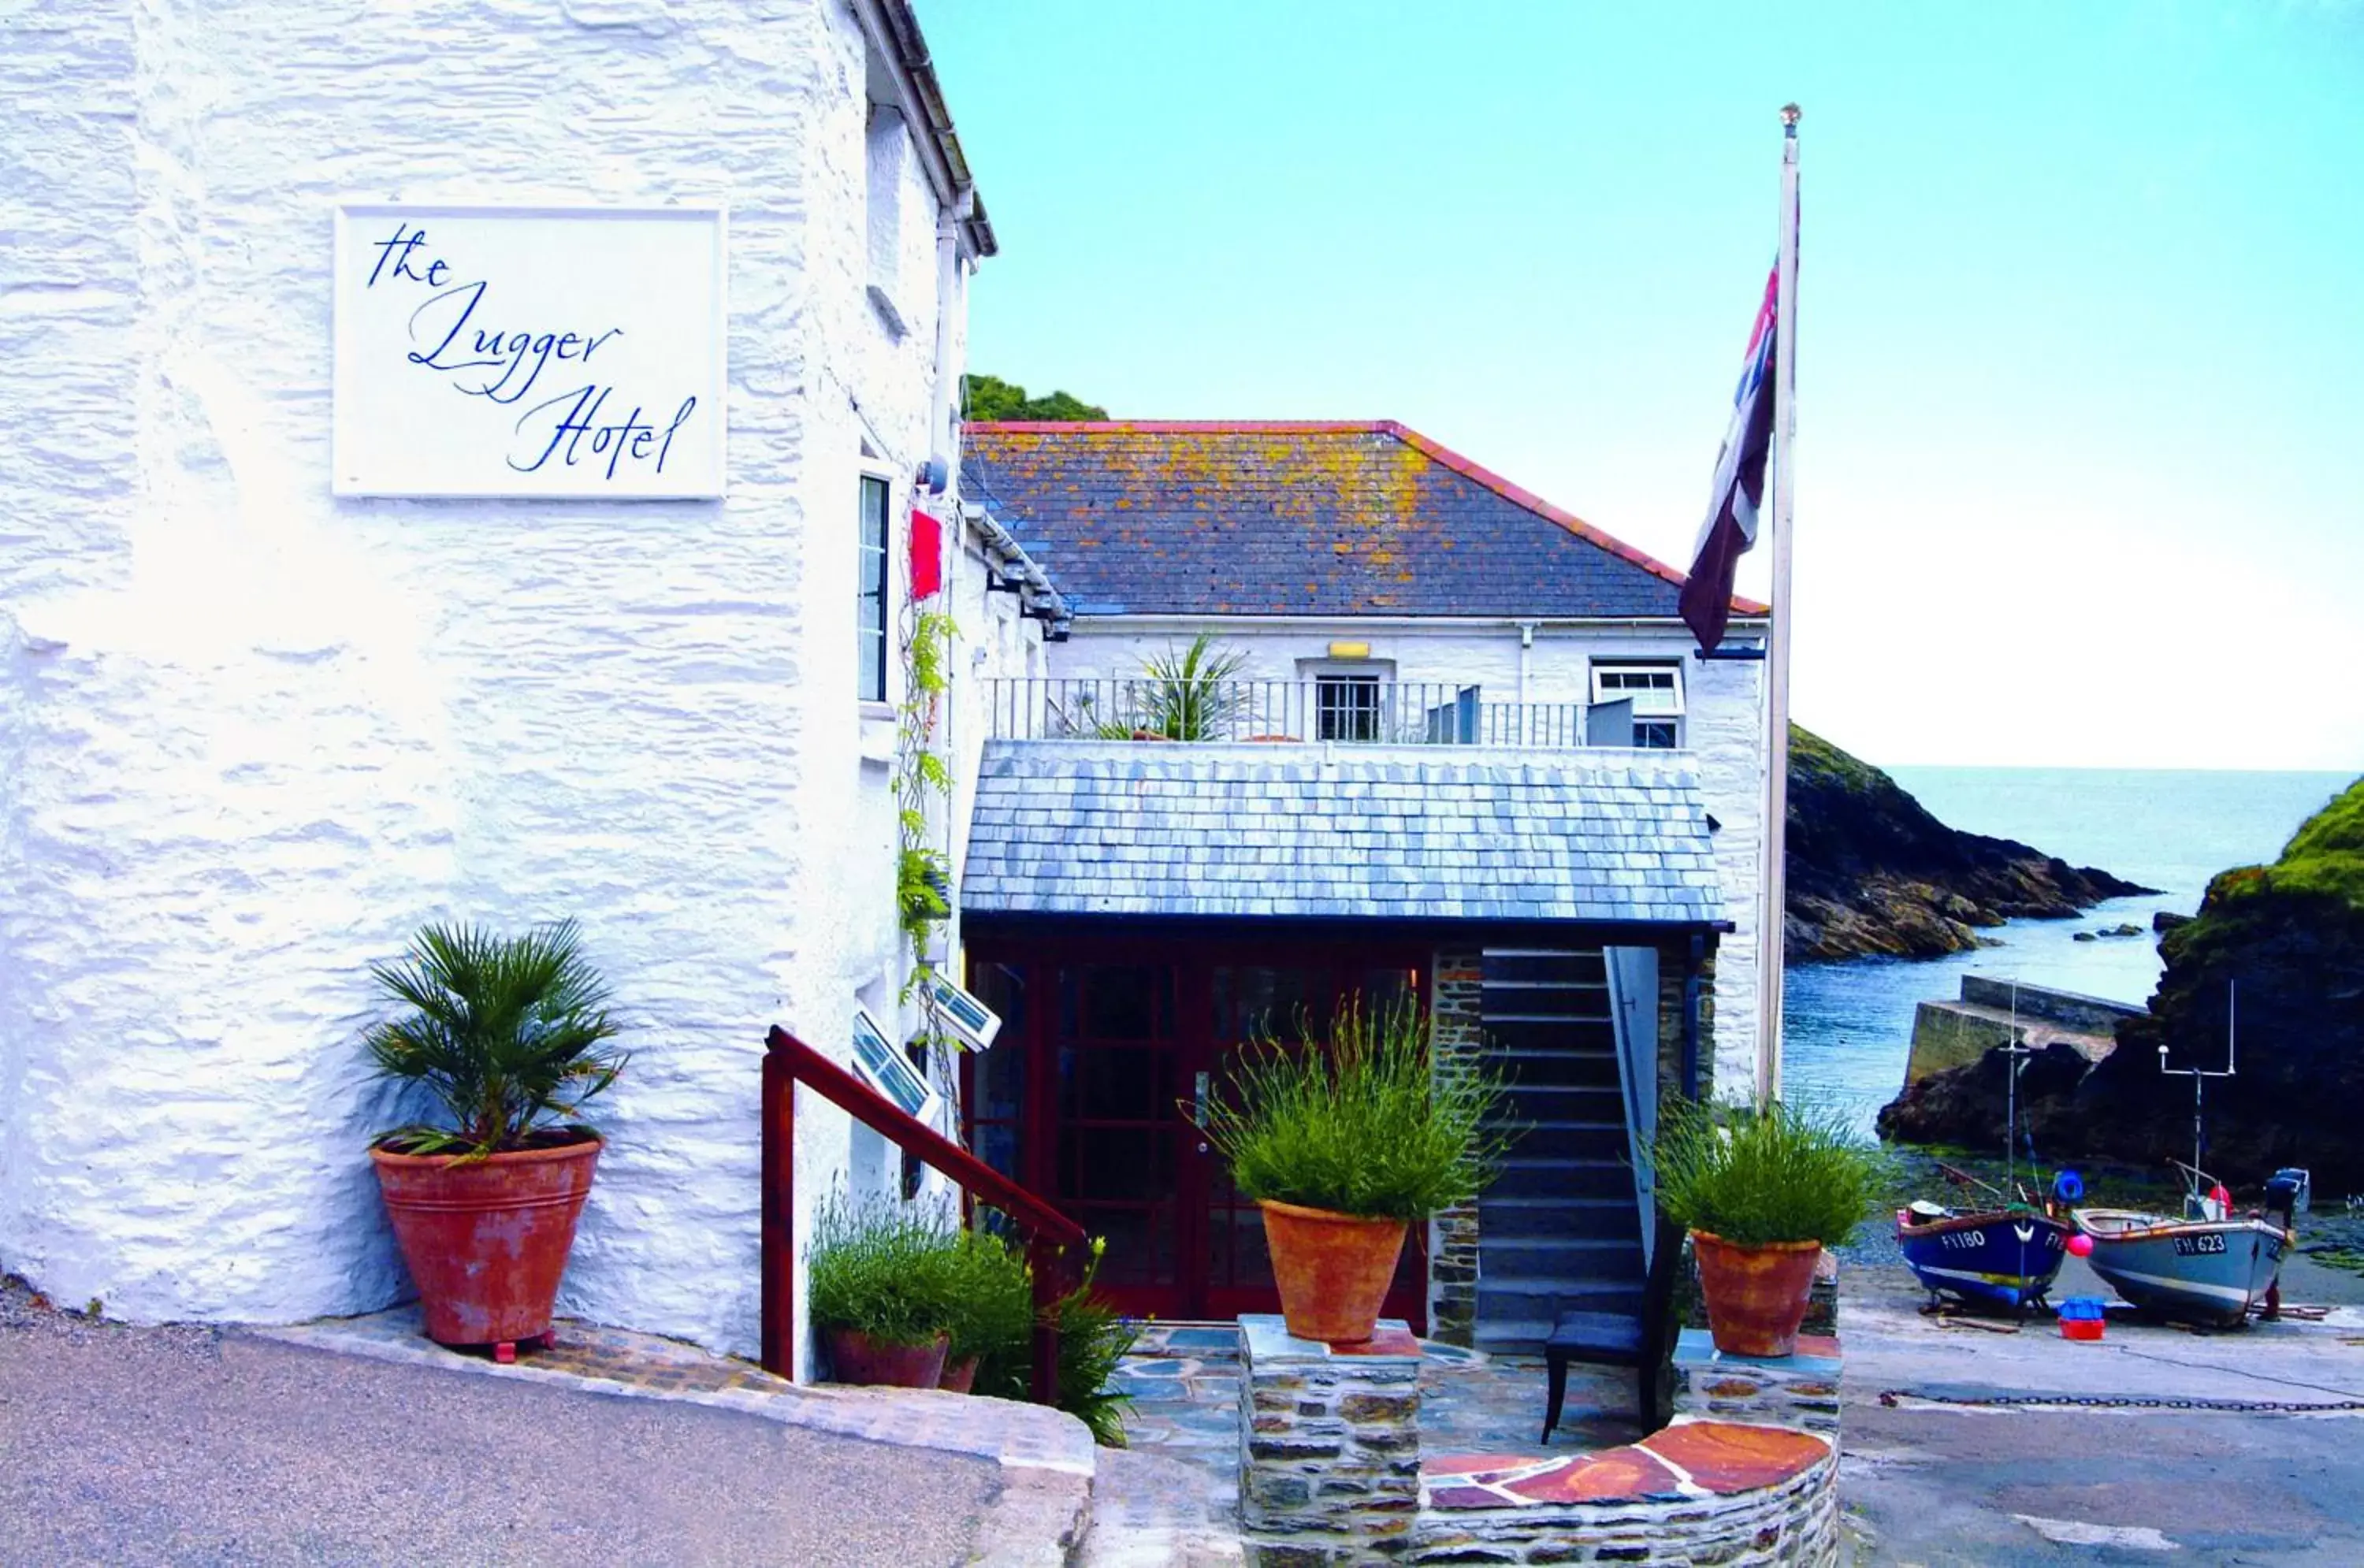 Facade/entrance, Property Building in Lugger Hotel ‘A Bespoke Hotel’